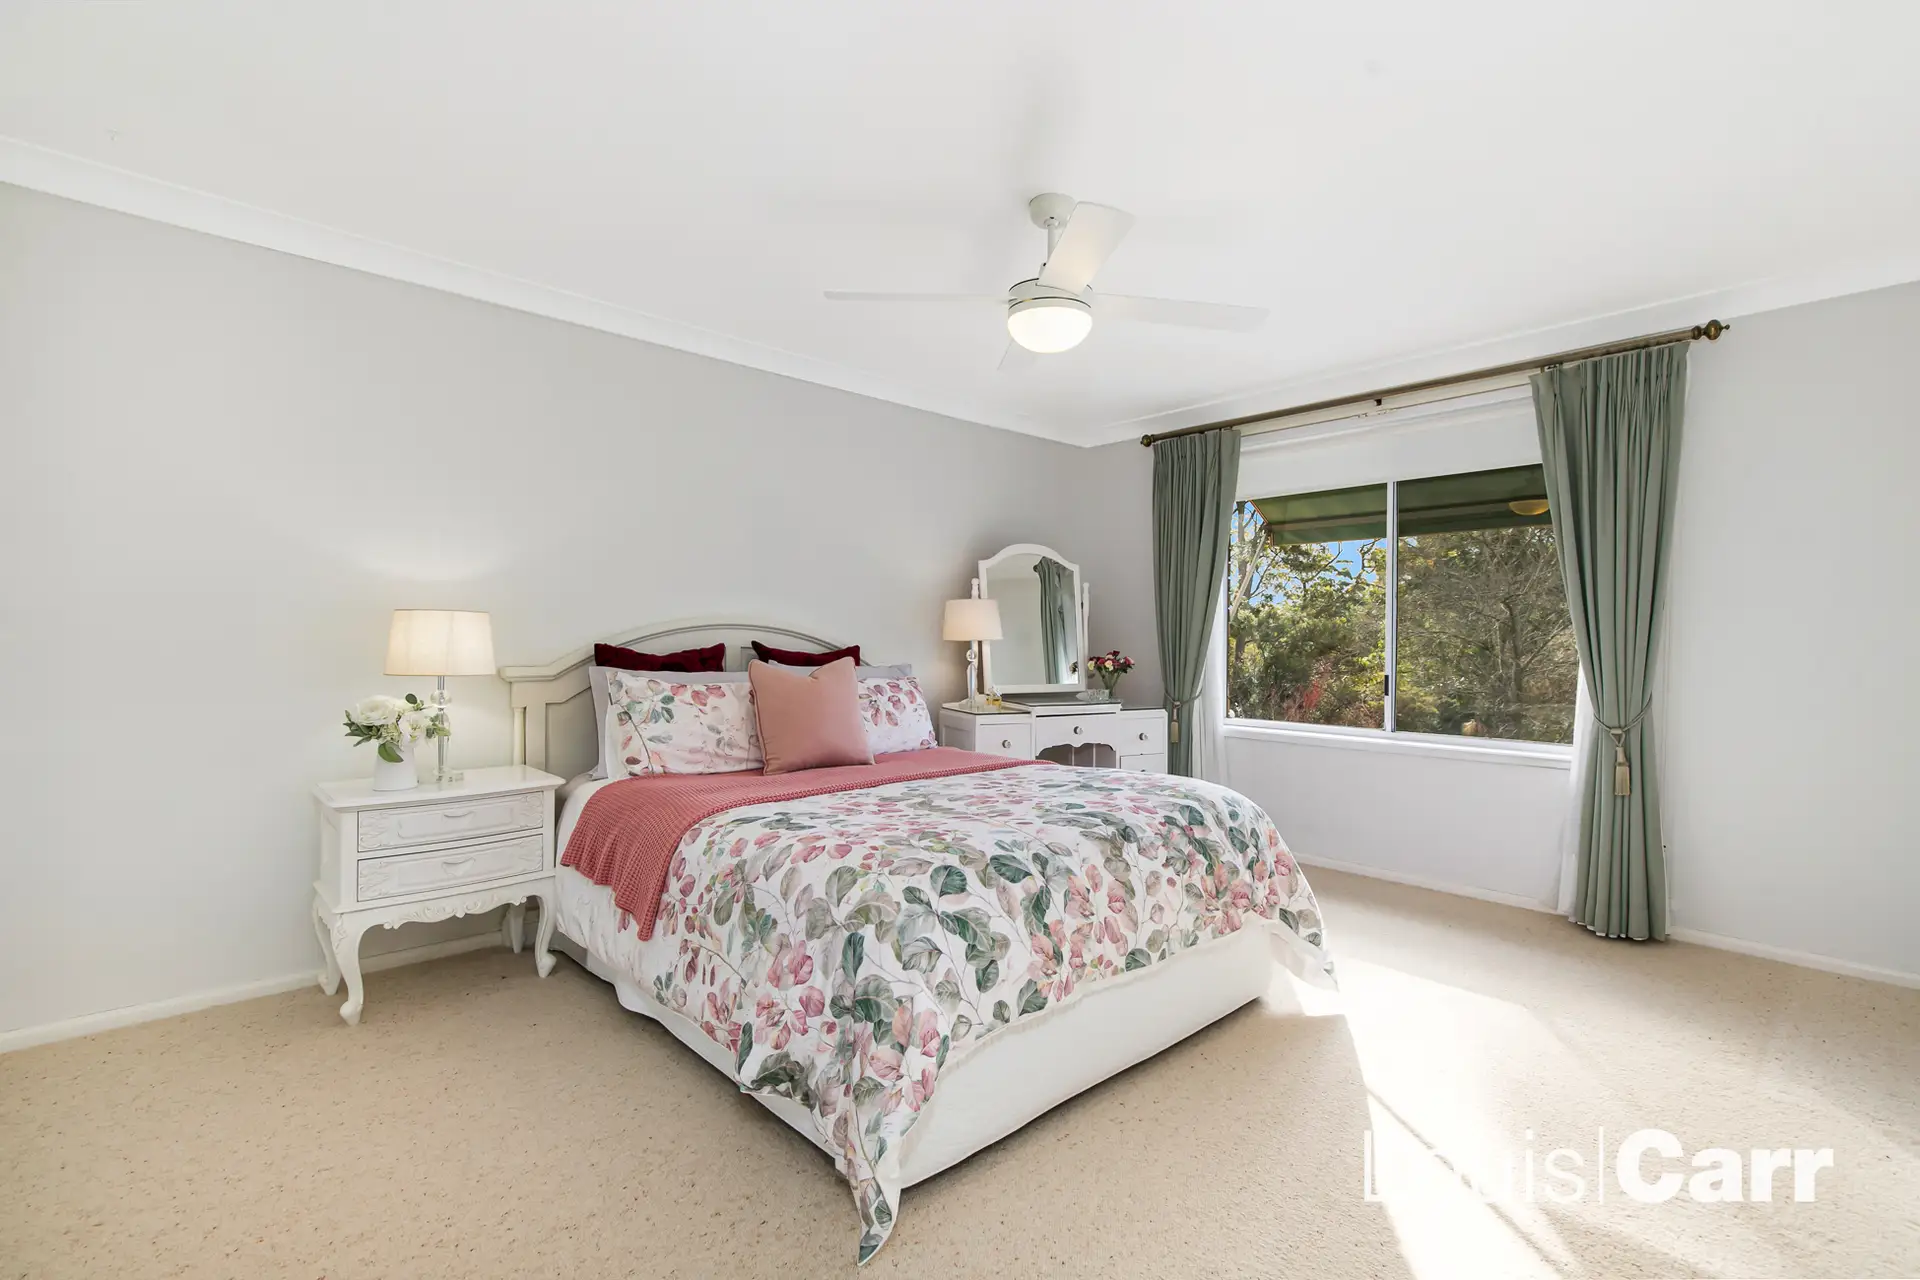 16 Anne William Drive, West Pennant Hills Sold by Louis Carr Real Estate - image 1